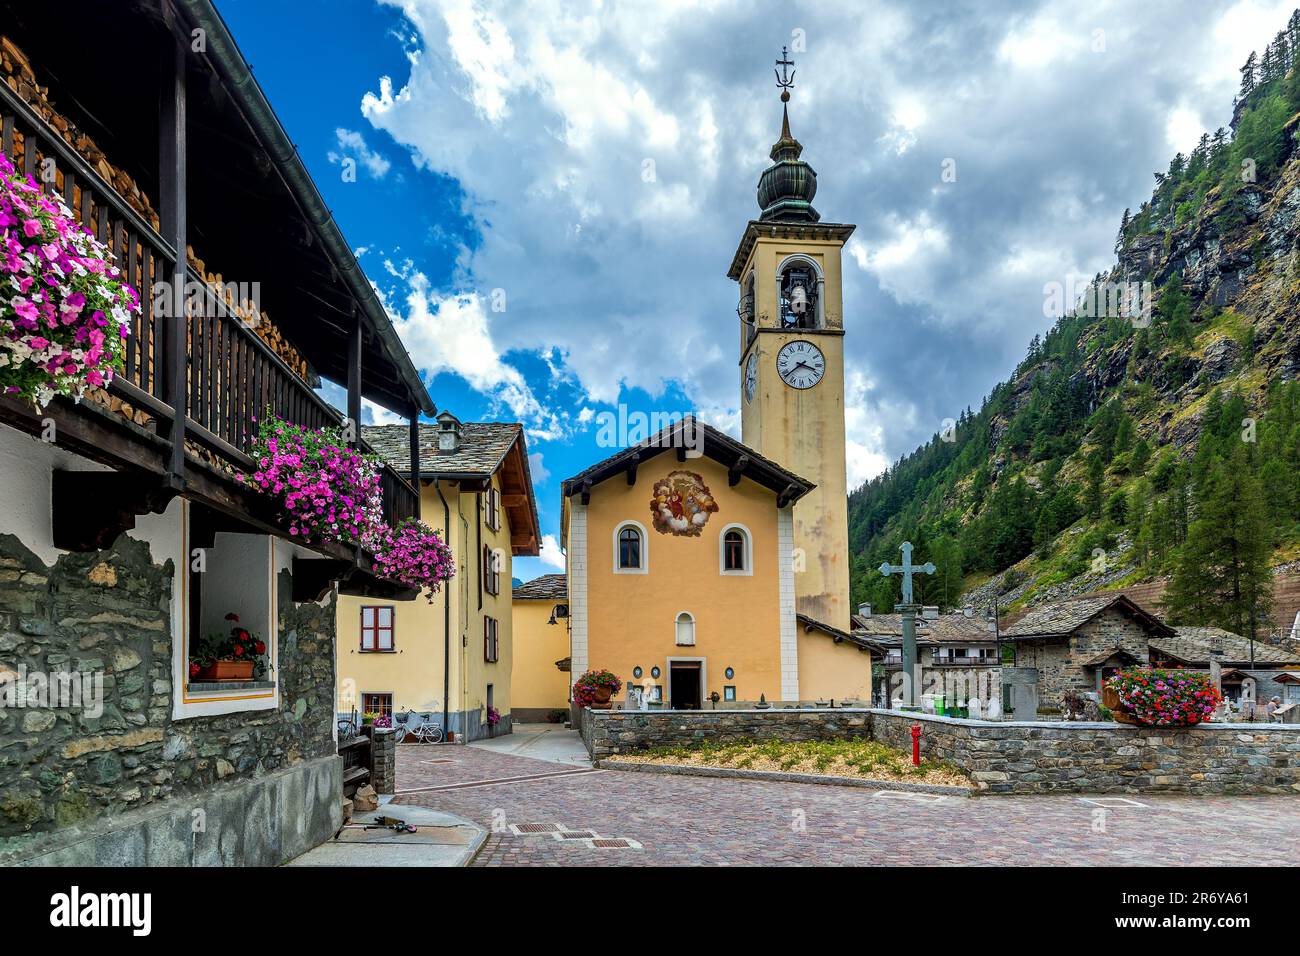 Church with big clock on the bell tower and houses decorated with flowers in small alpine town of Gressoney la Trinite in Italy. Stock Photo